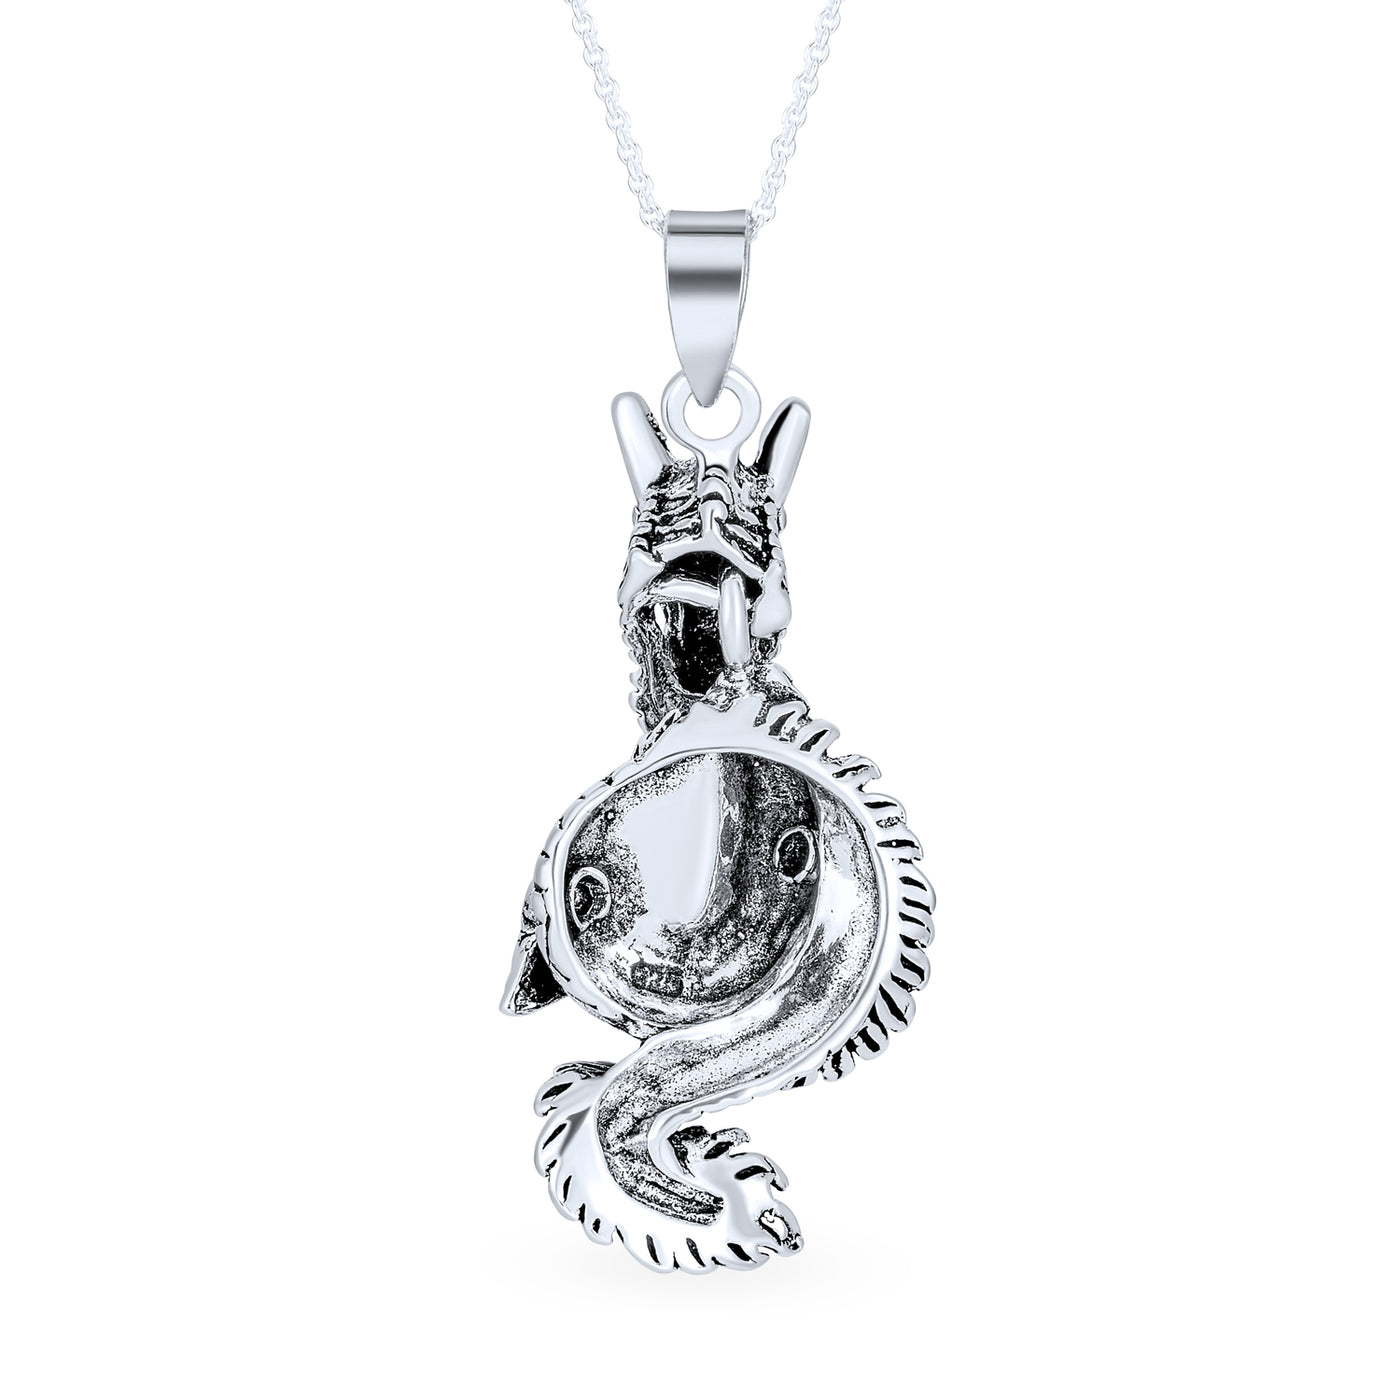 Asian Dragon Chinese Zodiac Astrology Pendant Necklace Sterling Silver